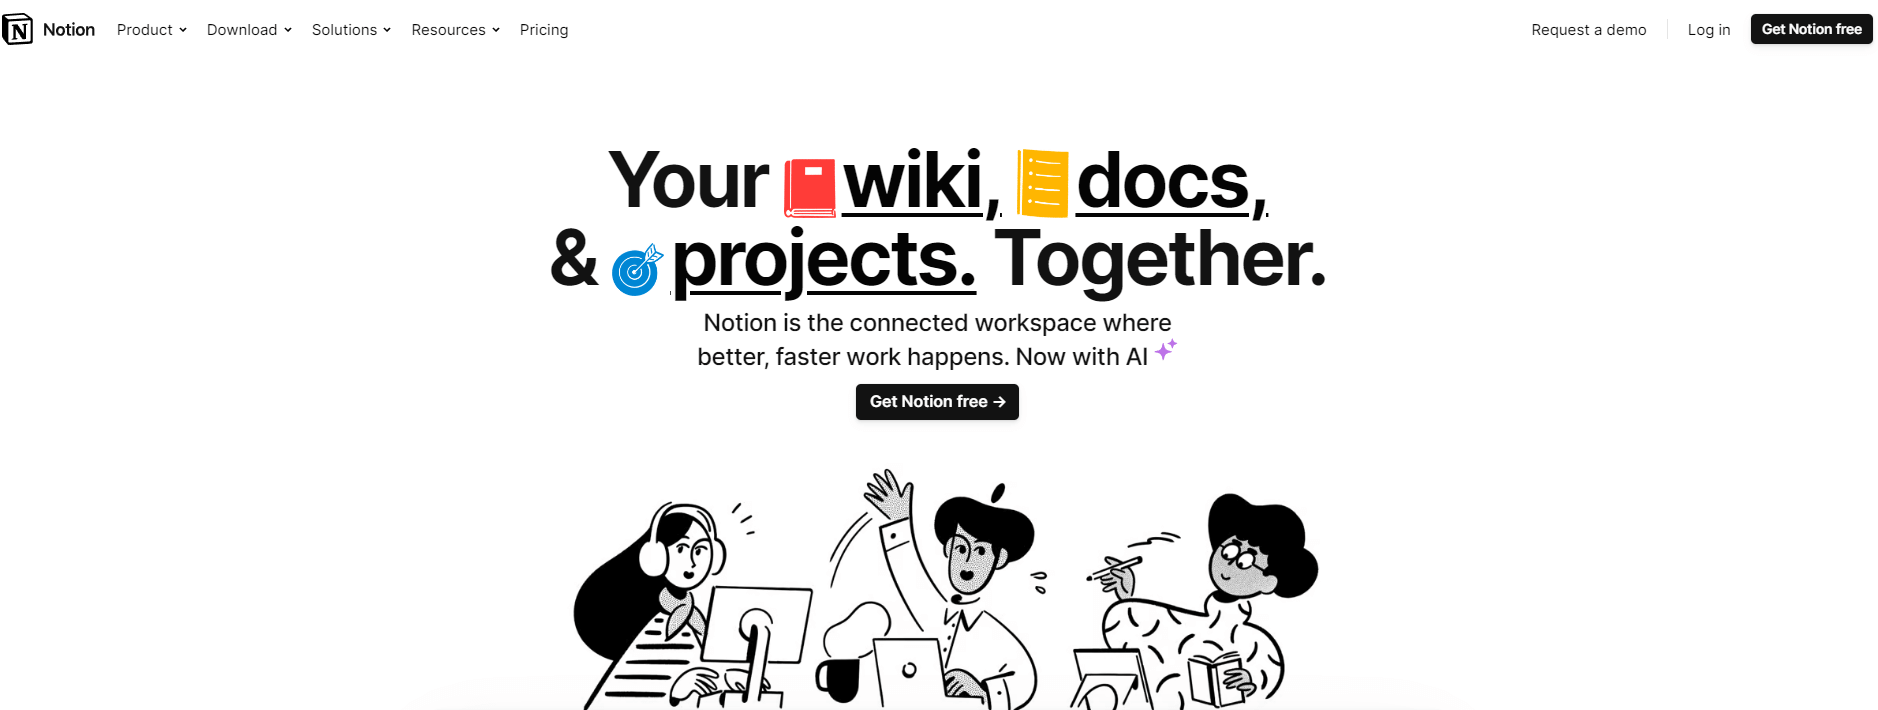 Notion homepage showing a collaboration cartoon and highlighting the benefit of having wiki, docs and projects together in one place.